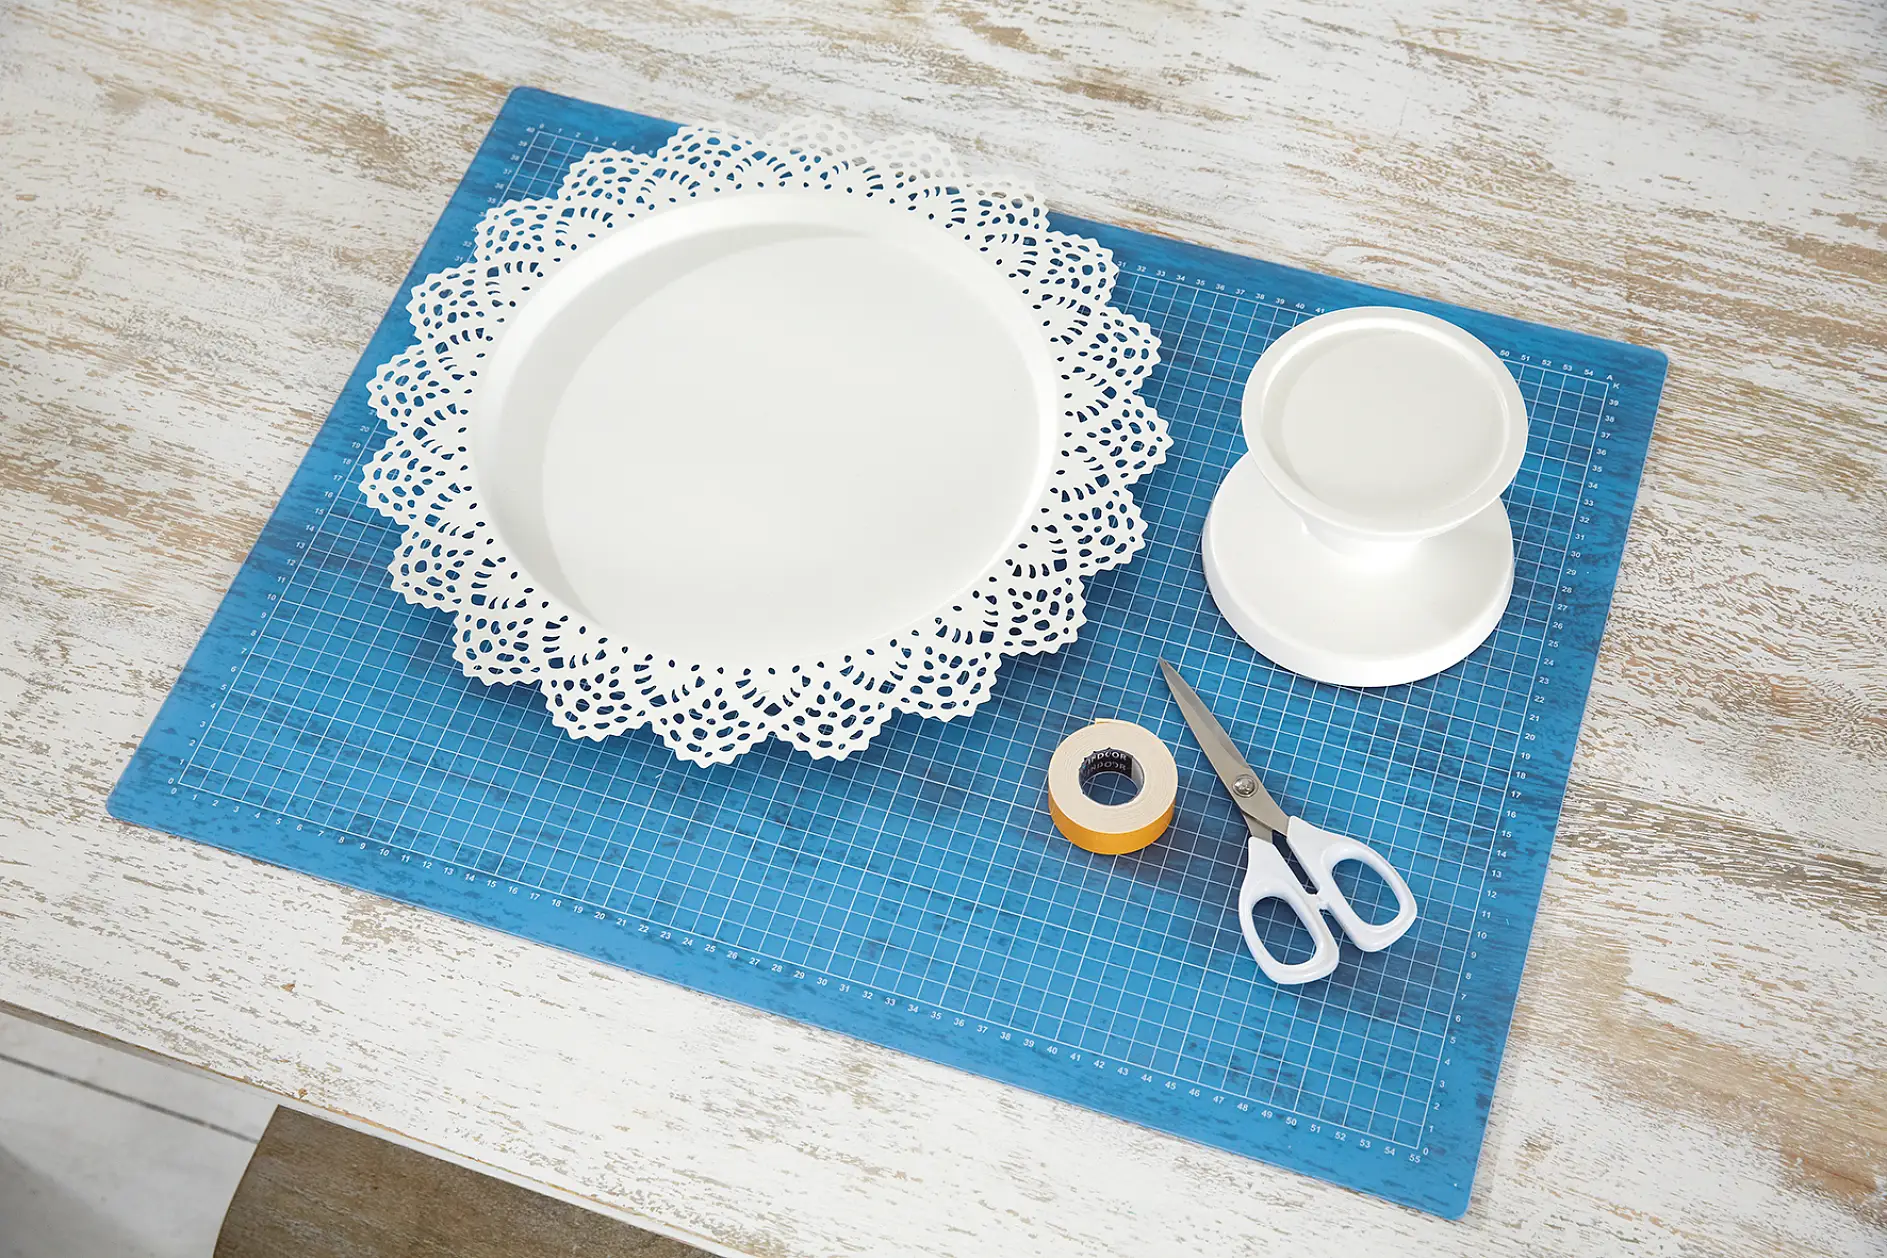 DIY Cake stand / Step 1: Overview